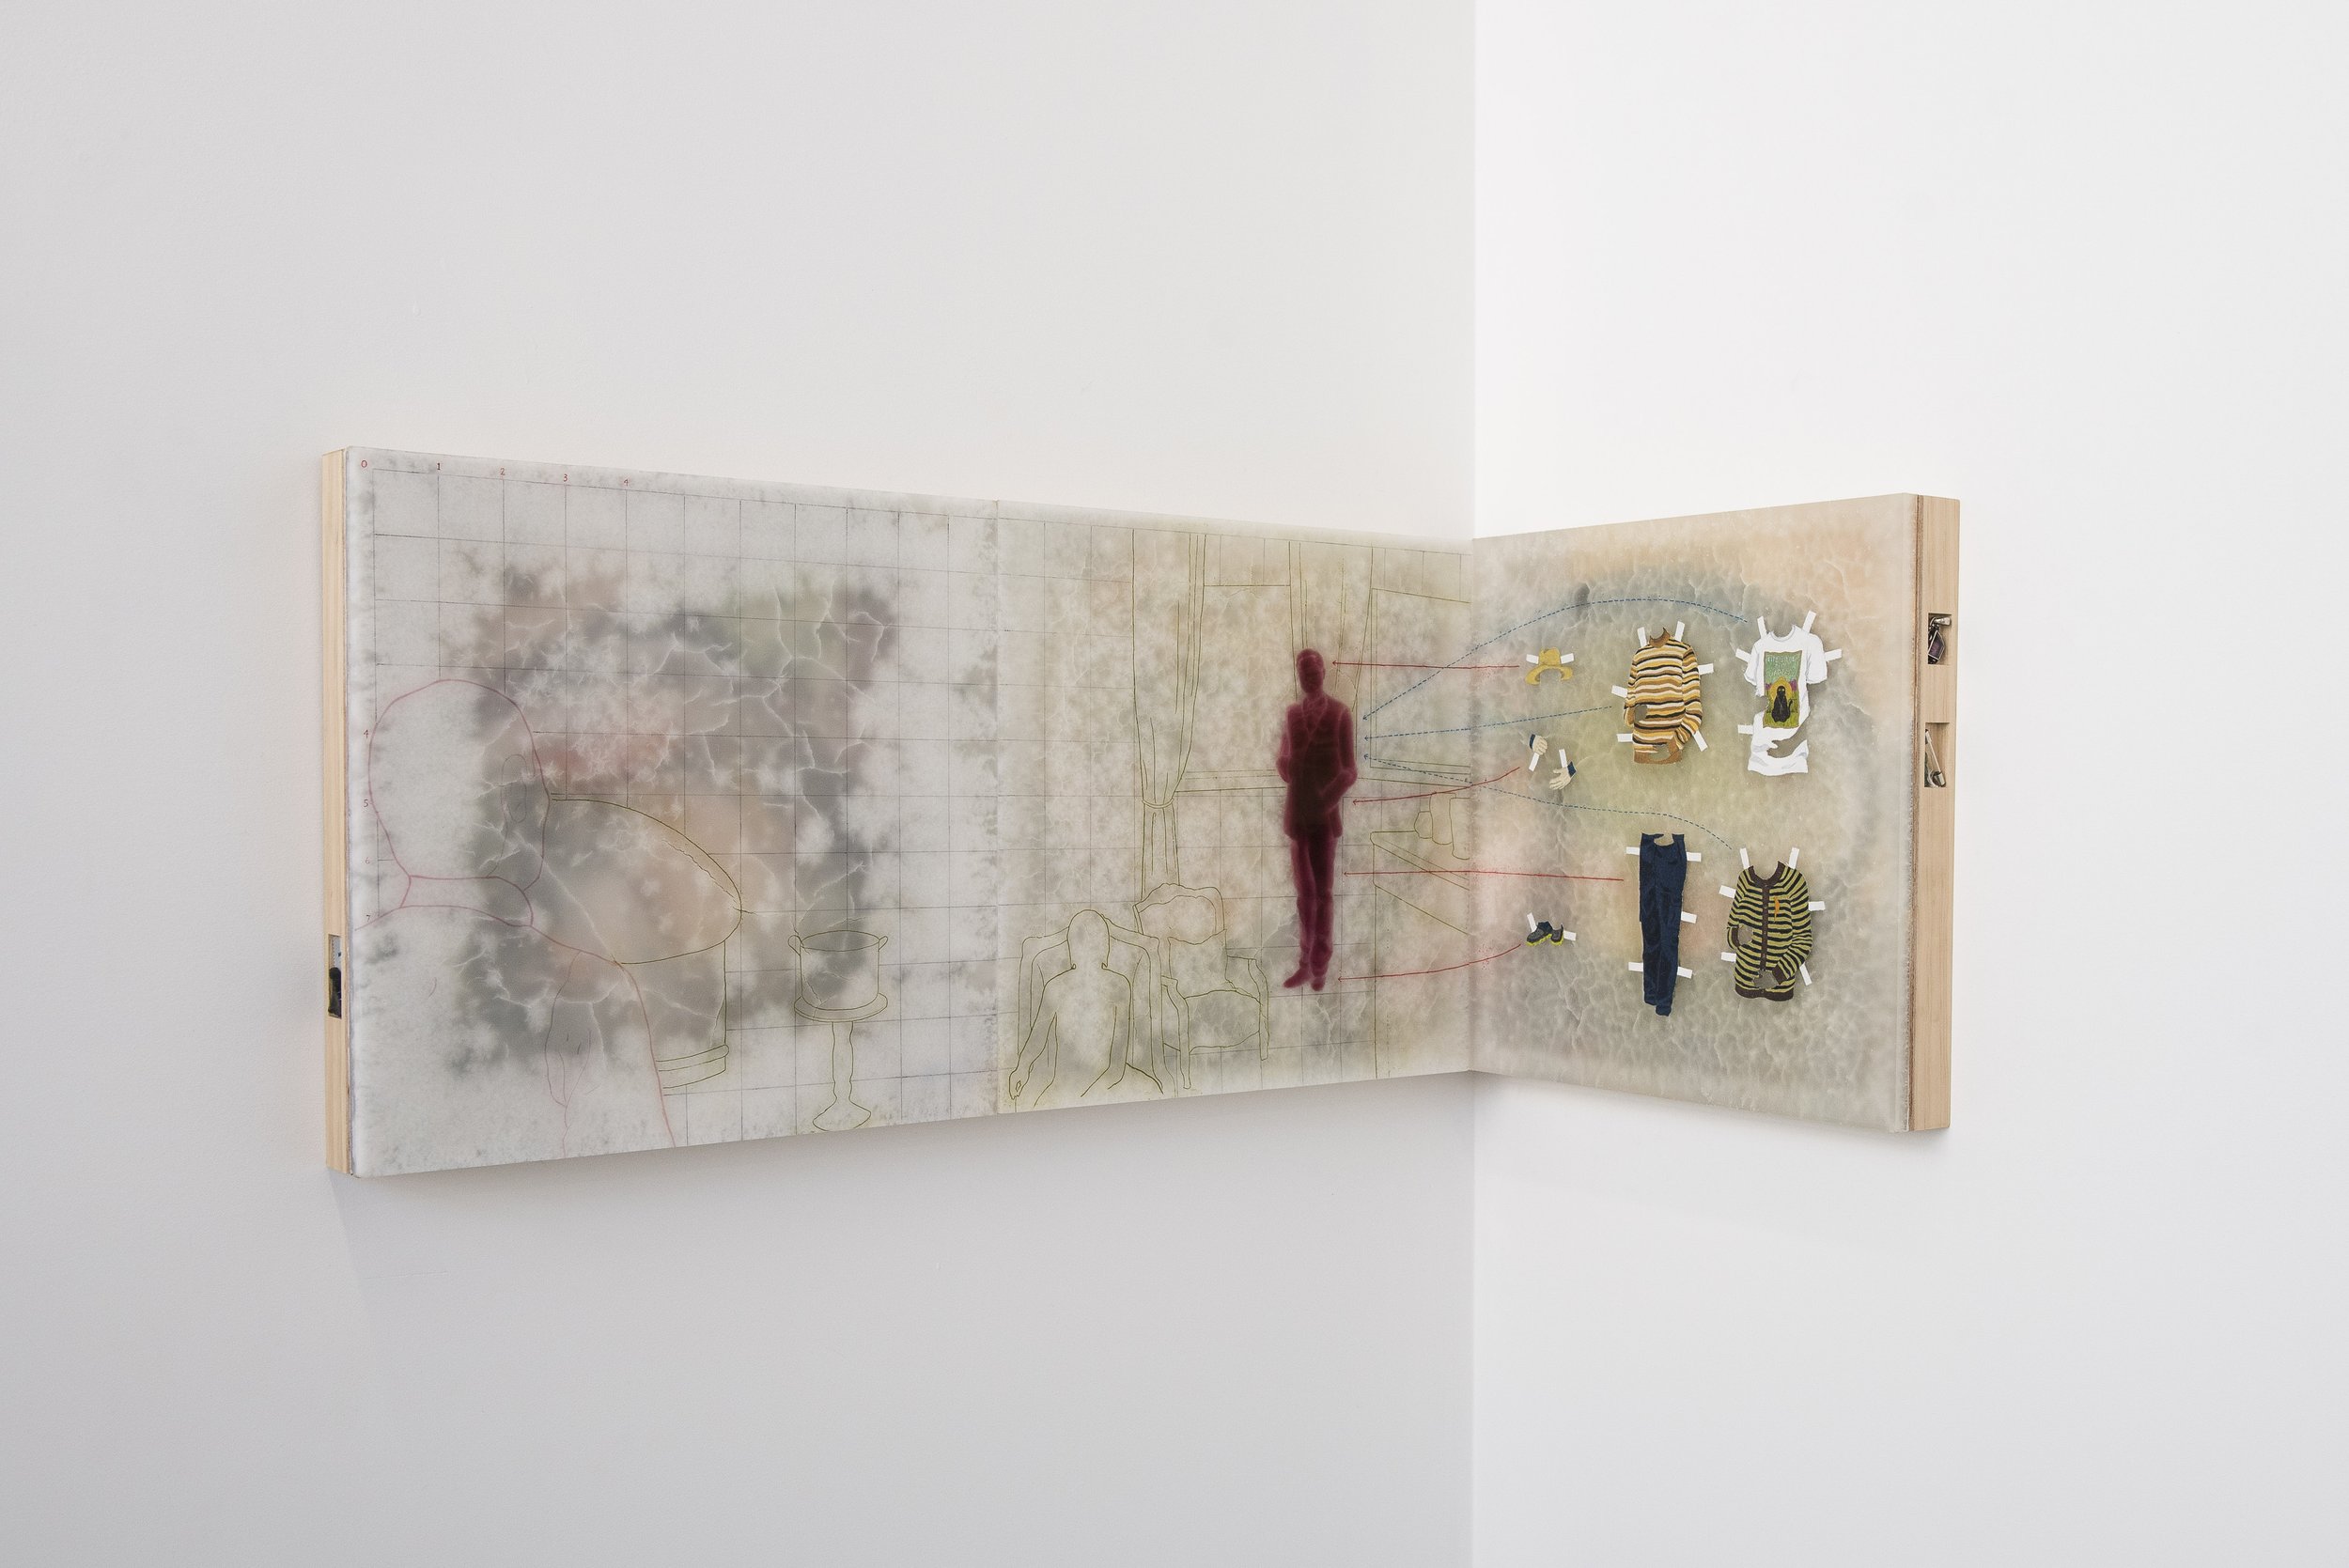   Jay as Garden Enthusiast , 2021   Triptych - paraffin wax, resin, oil paint, paper, canvas, found objects on plywood and pine cradle frame.   Each panel measures 34 x 33.5 x 4 cm.   Image courtesy of Jordan Halsall. 